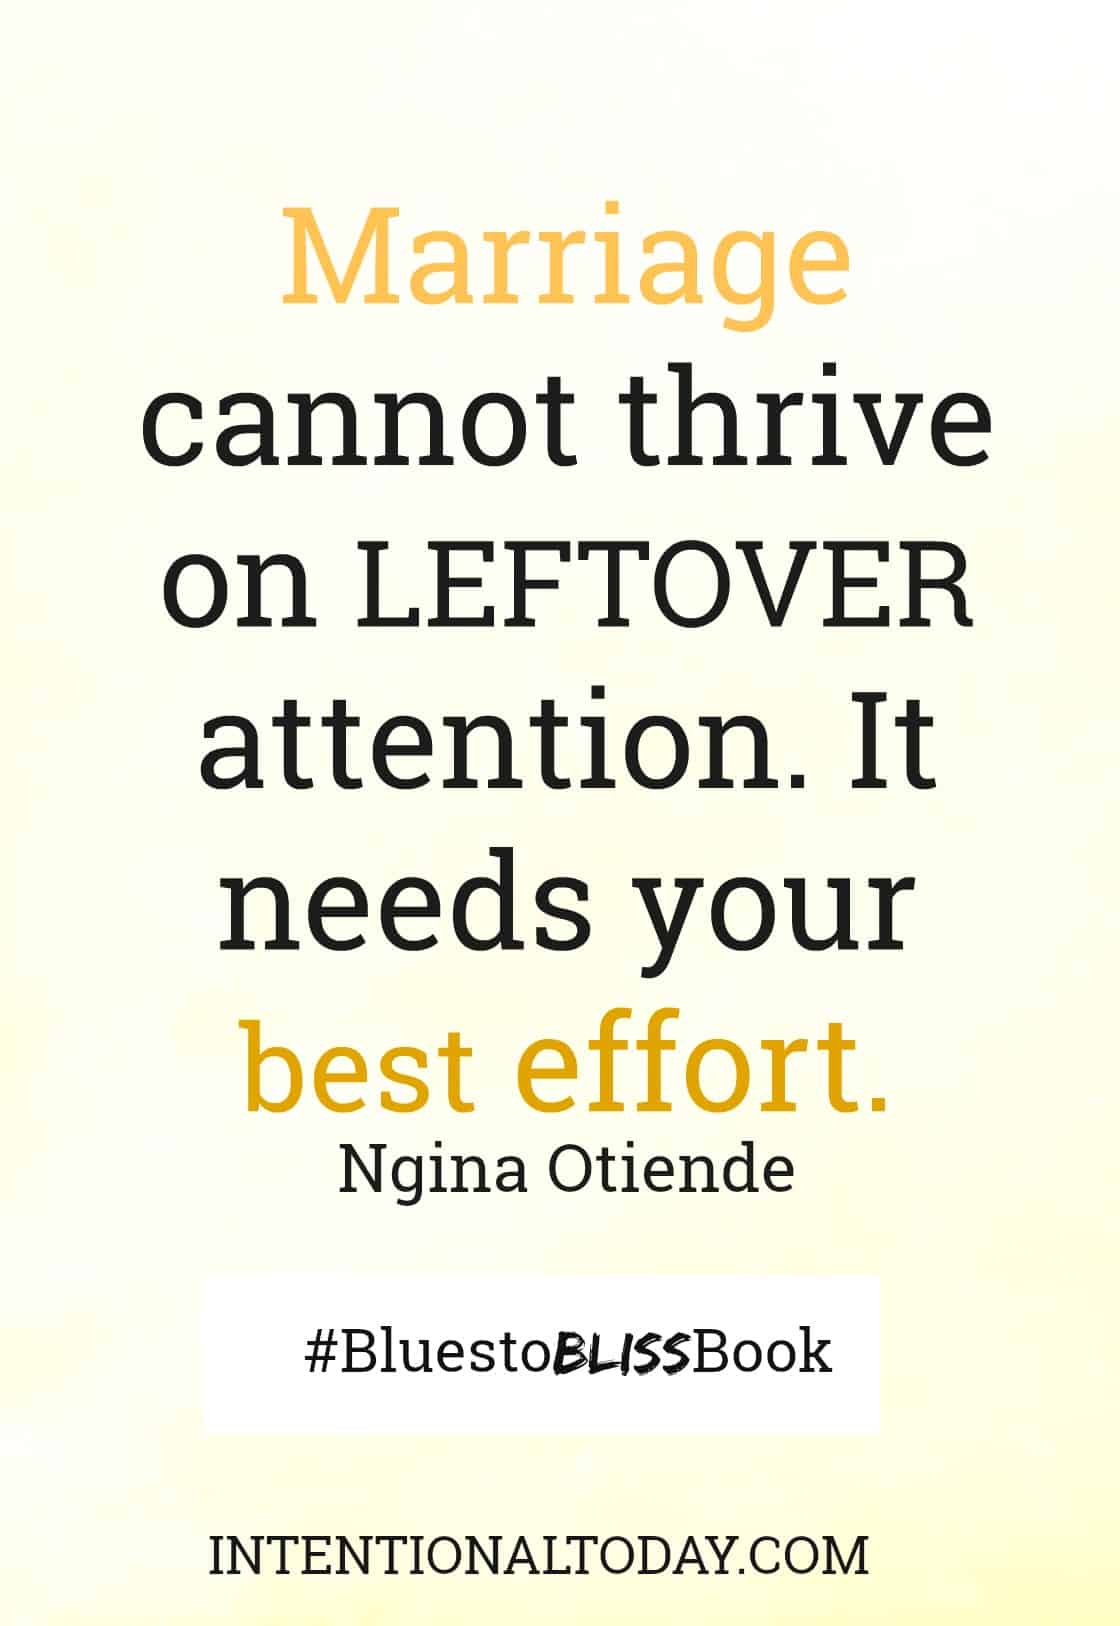 Marriage cannot survive on left-overs. It needs your best attention. Here's how to develop that attention